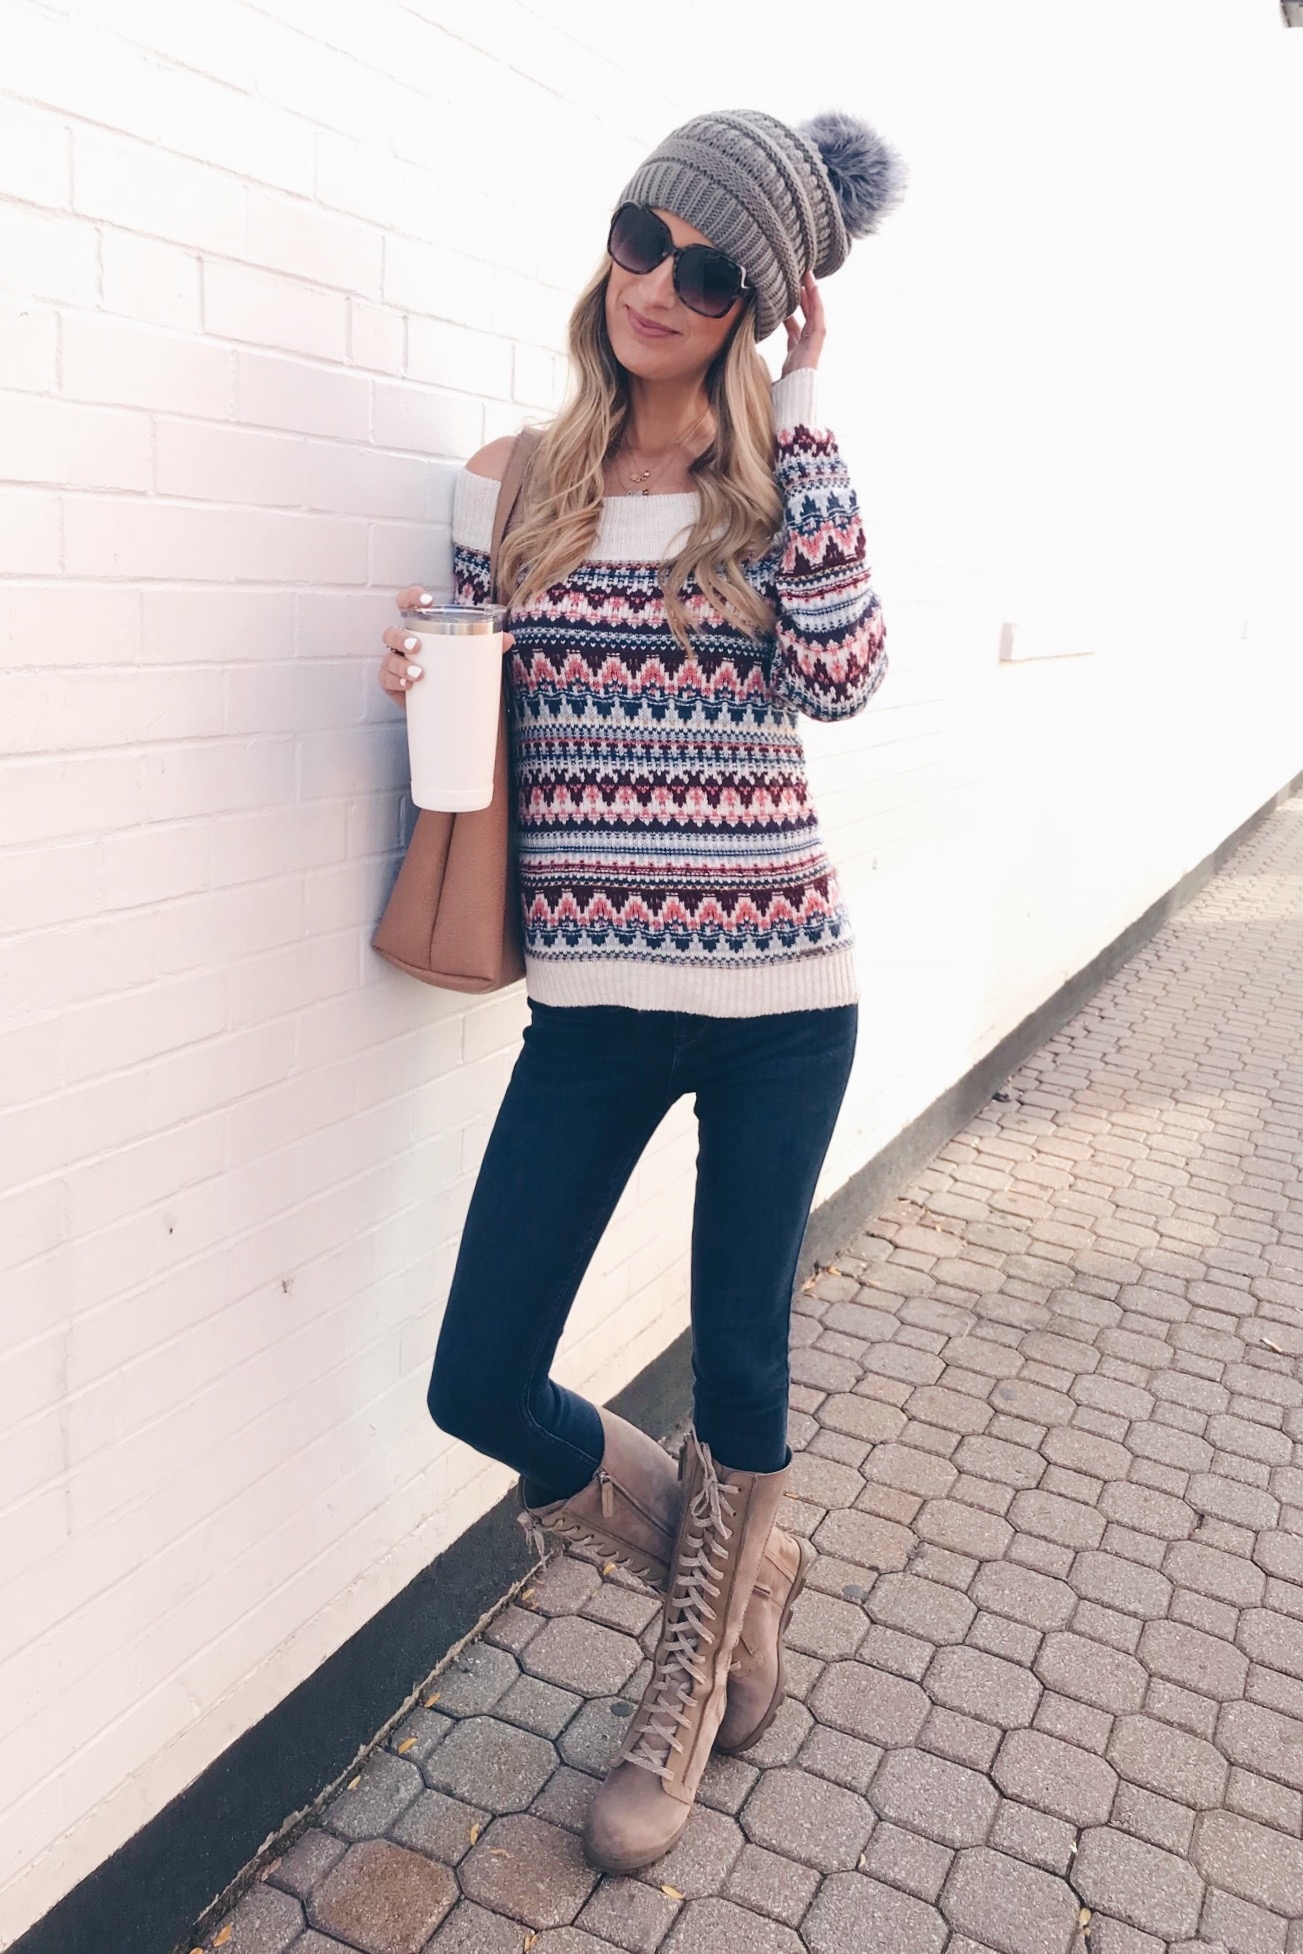 Colorful off the shoulder sweater | Fall Style Ideas